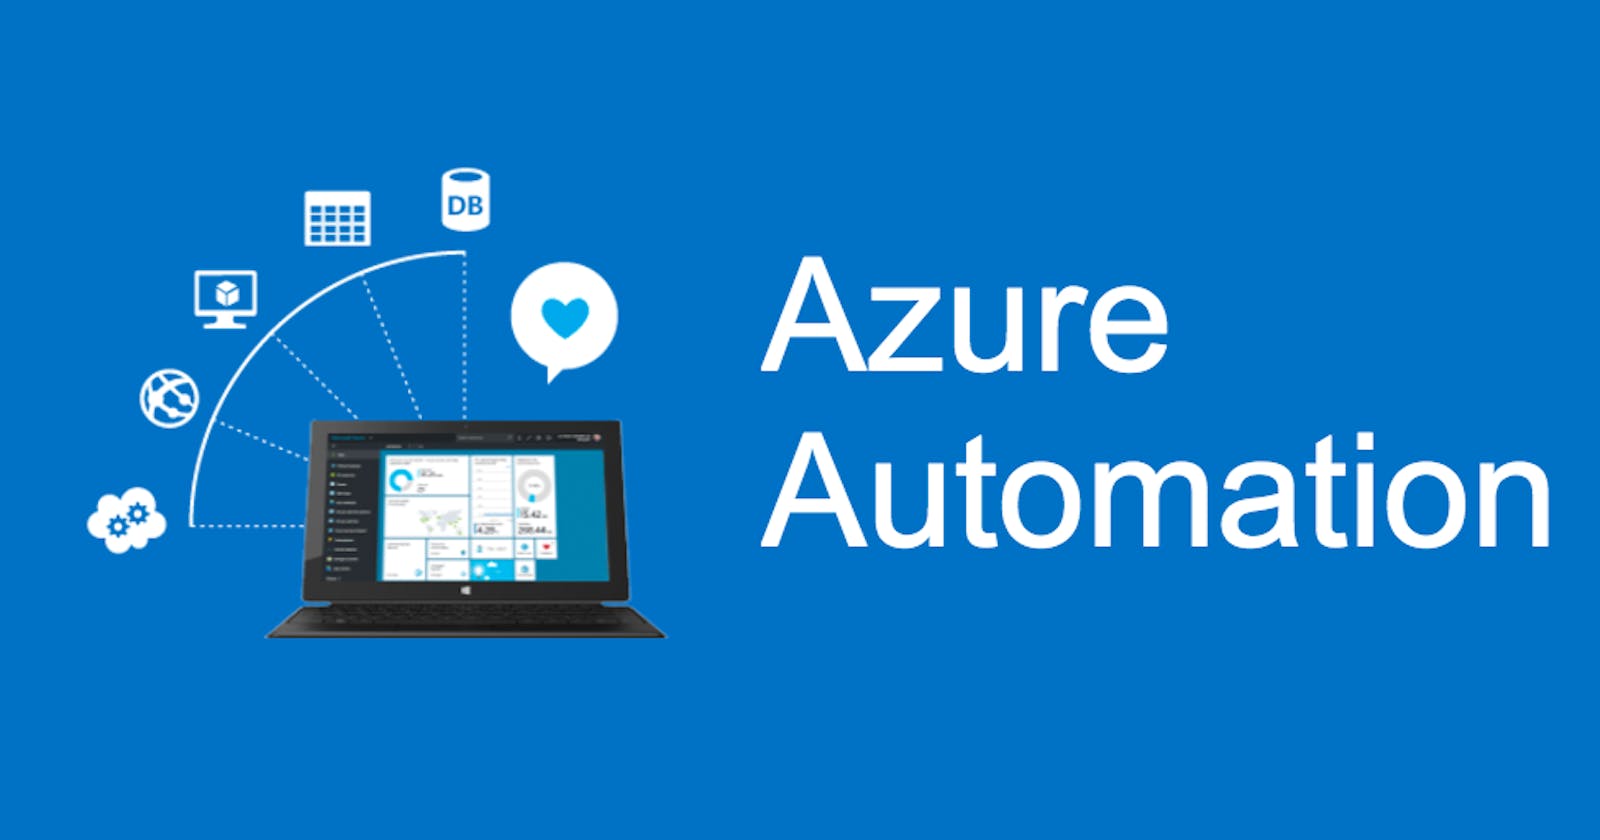 The Magic of Azure: A Symphony of Automation